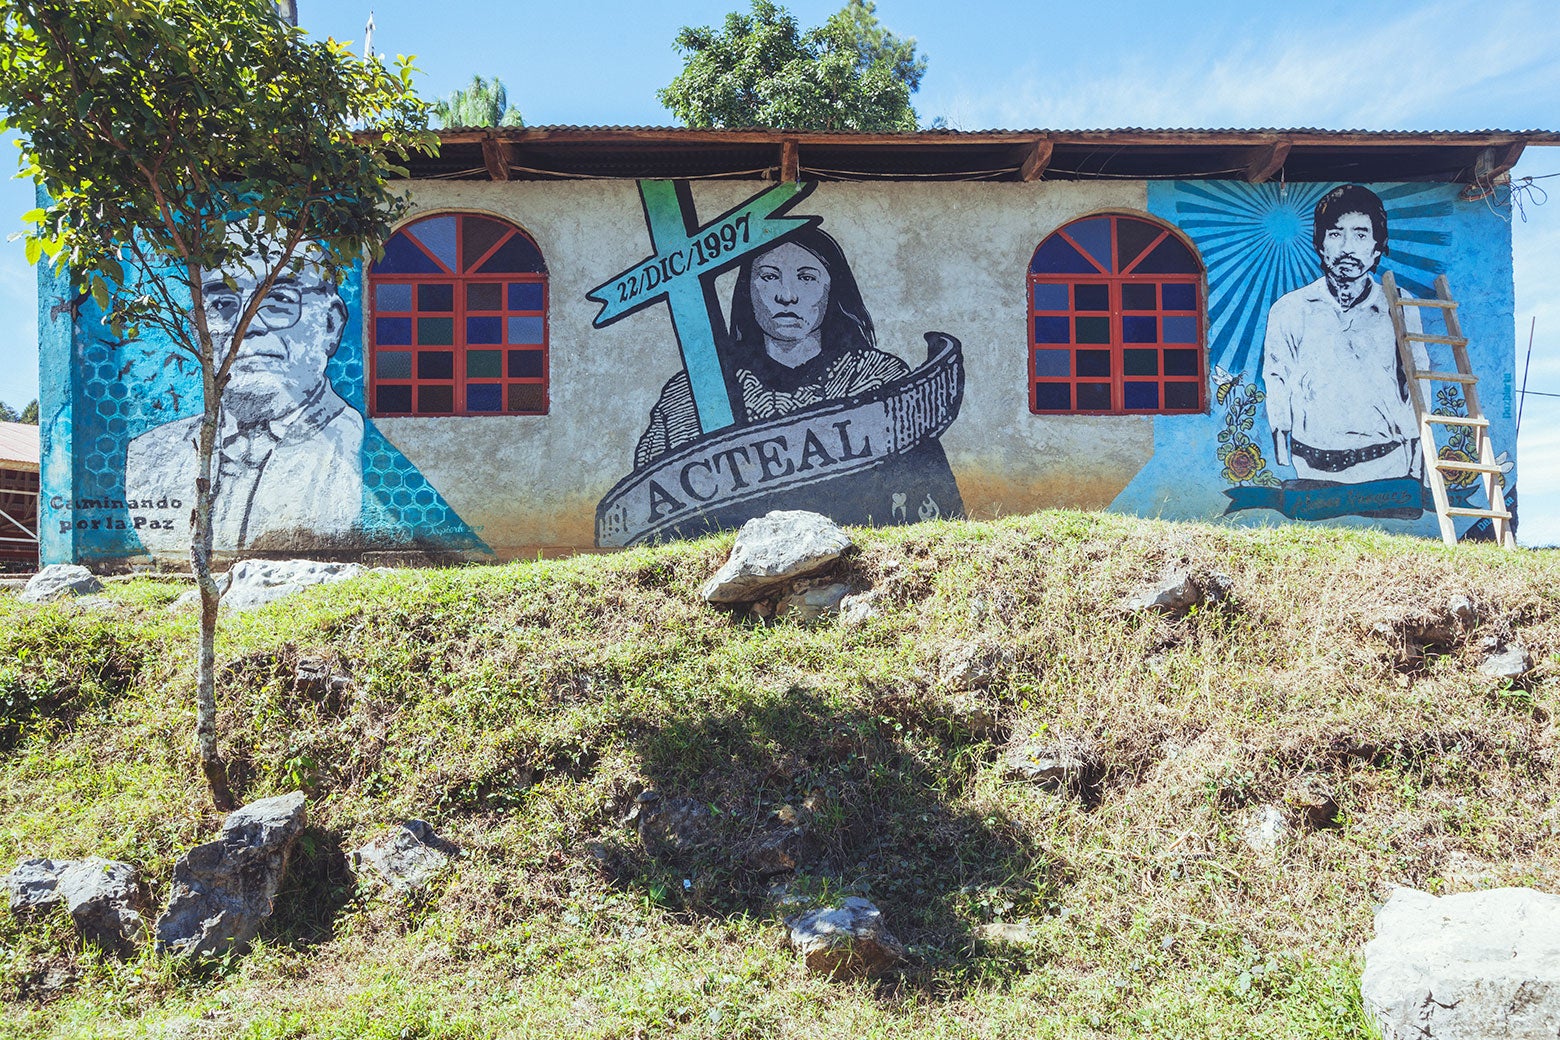 A mural in Acteal painted to commemorate the date of the massacre, December 22, 1997.